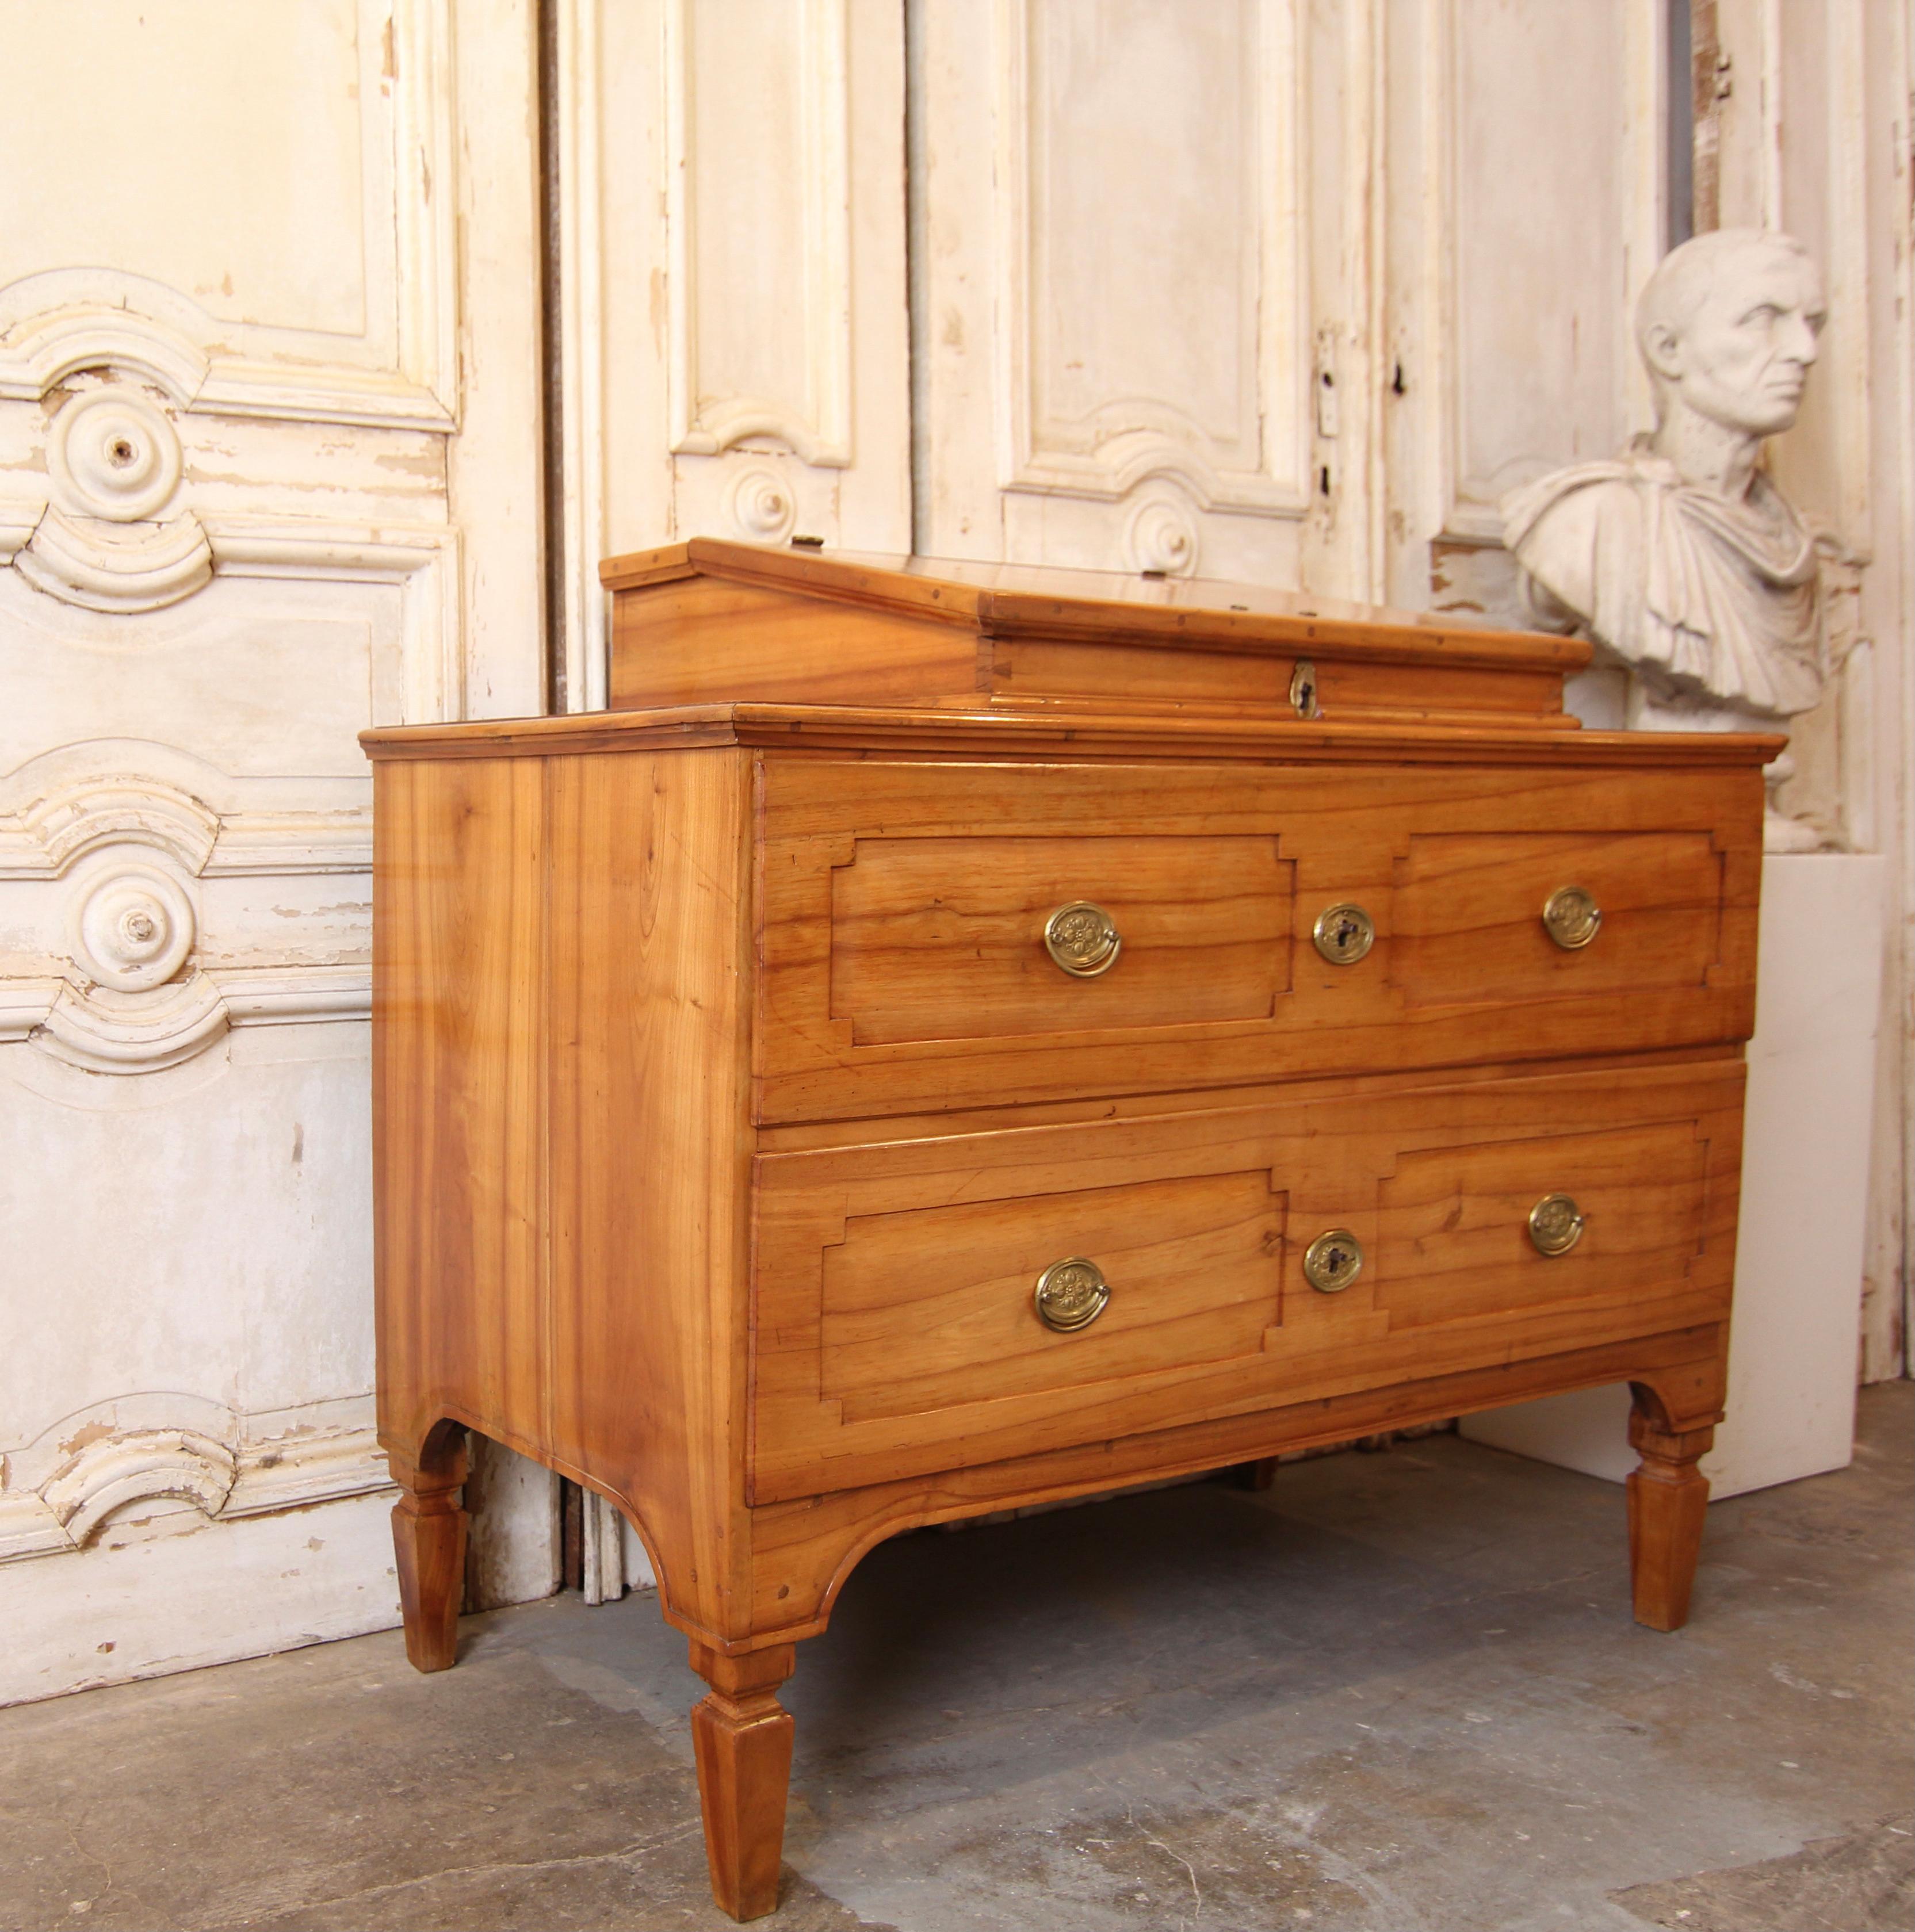 Classicist chest of drawers with desk. Southern Germany/Austria, around 1790. Solidly made of cherry wood.

Rectangular corpus with 2 drawers and slightly overhanging profiled top standing on conical square legs. Fixed desk top with 3 small